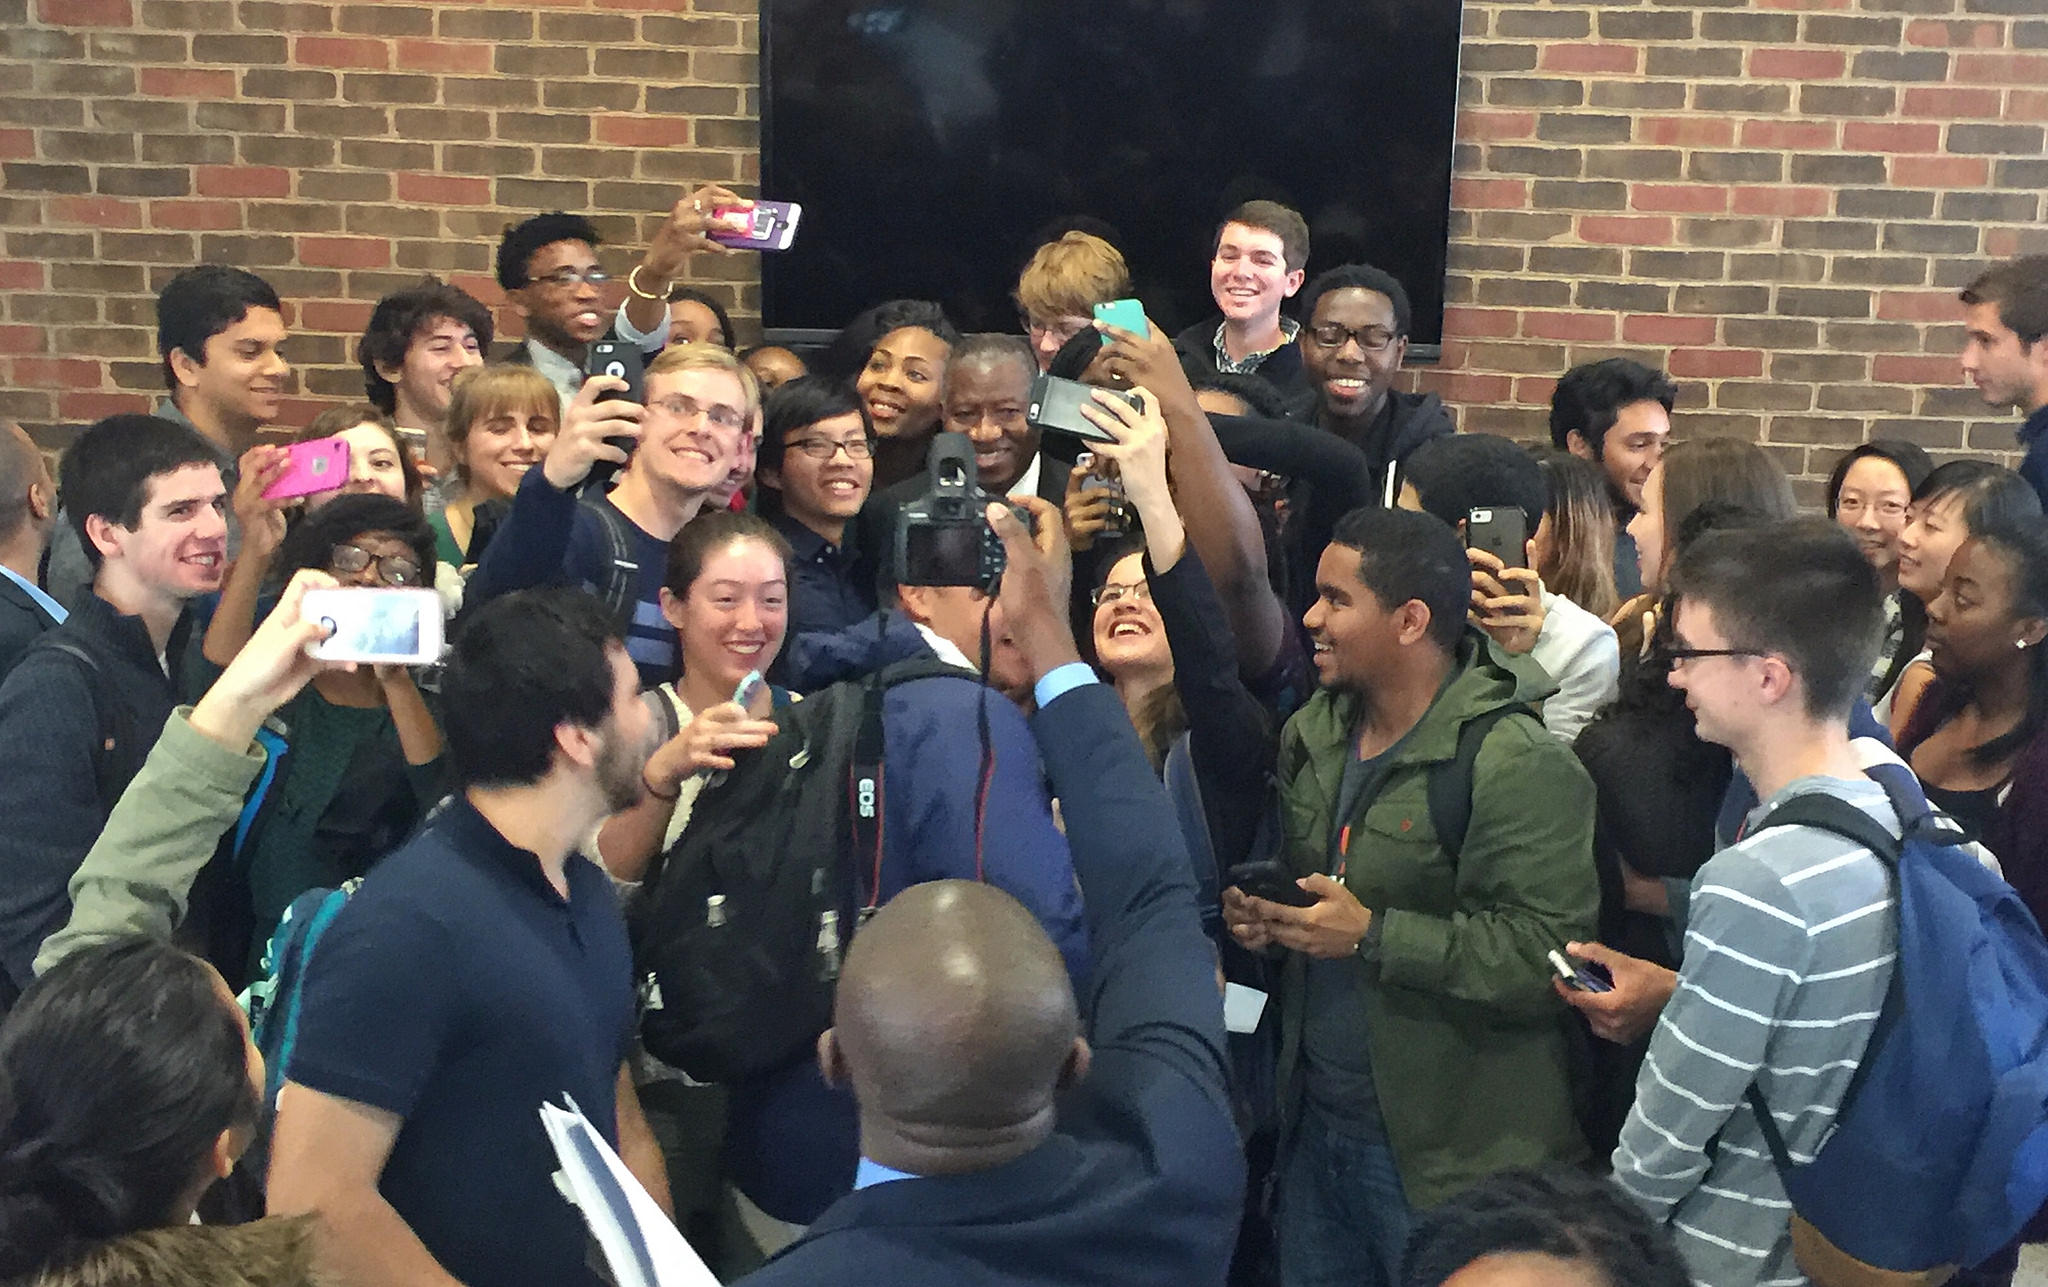 Former President Goodluck Jonathan visited The Presidential Precinct in Virginia, USA on November 9, 2015. Students in a mad rush to get a selfie with Dr. Jonathan| Flickr/The Presidential Precinct 